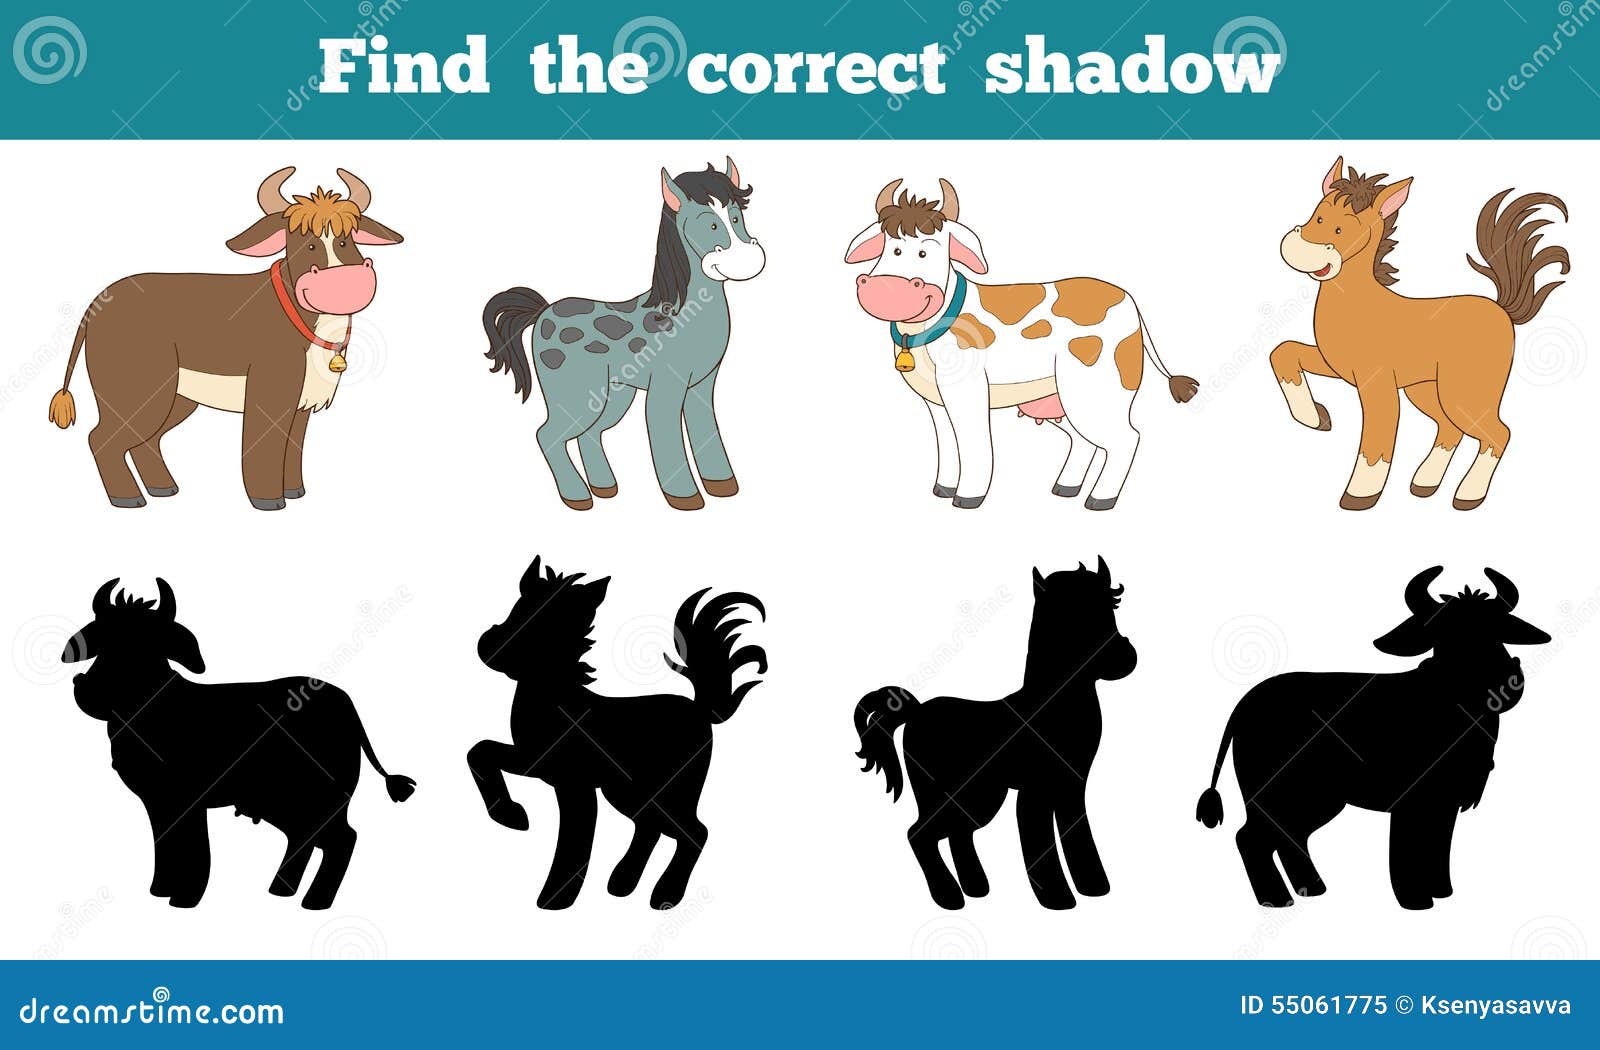 find the correct shadow: farm animals (horse and cows)